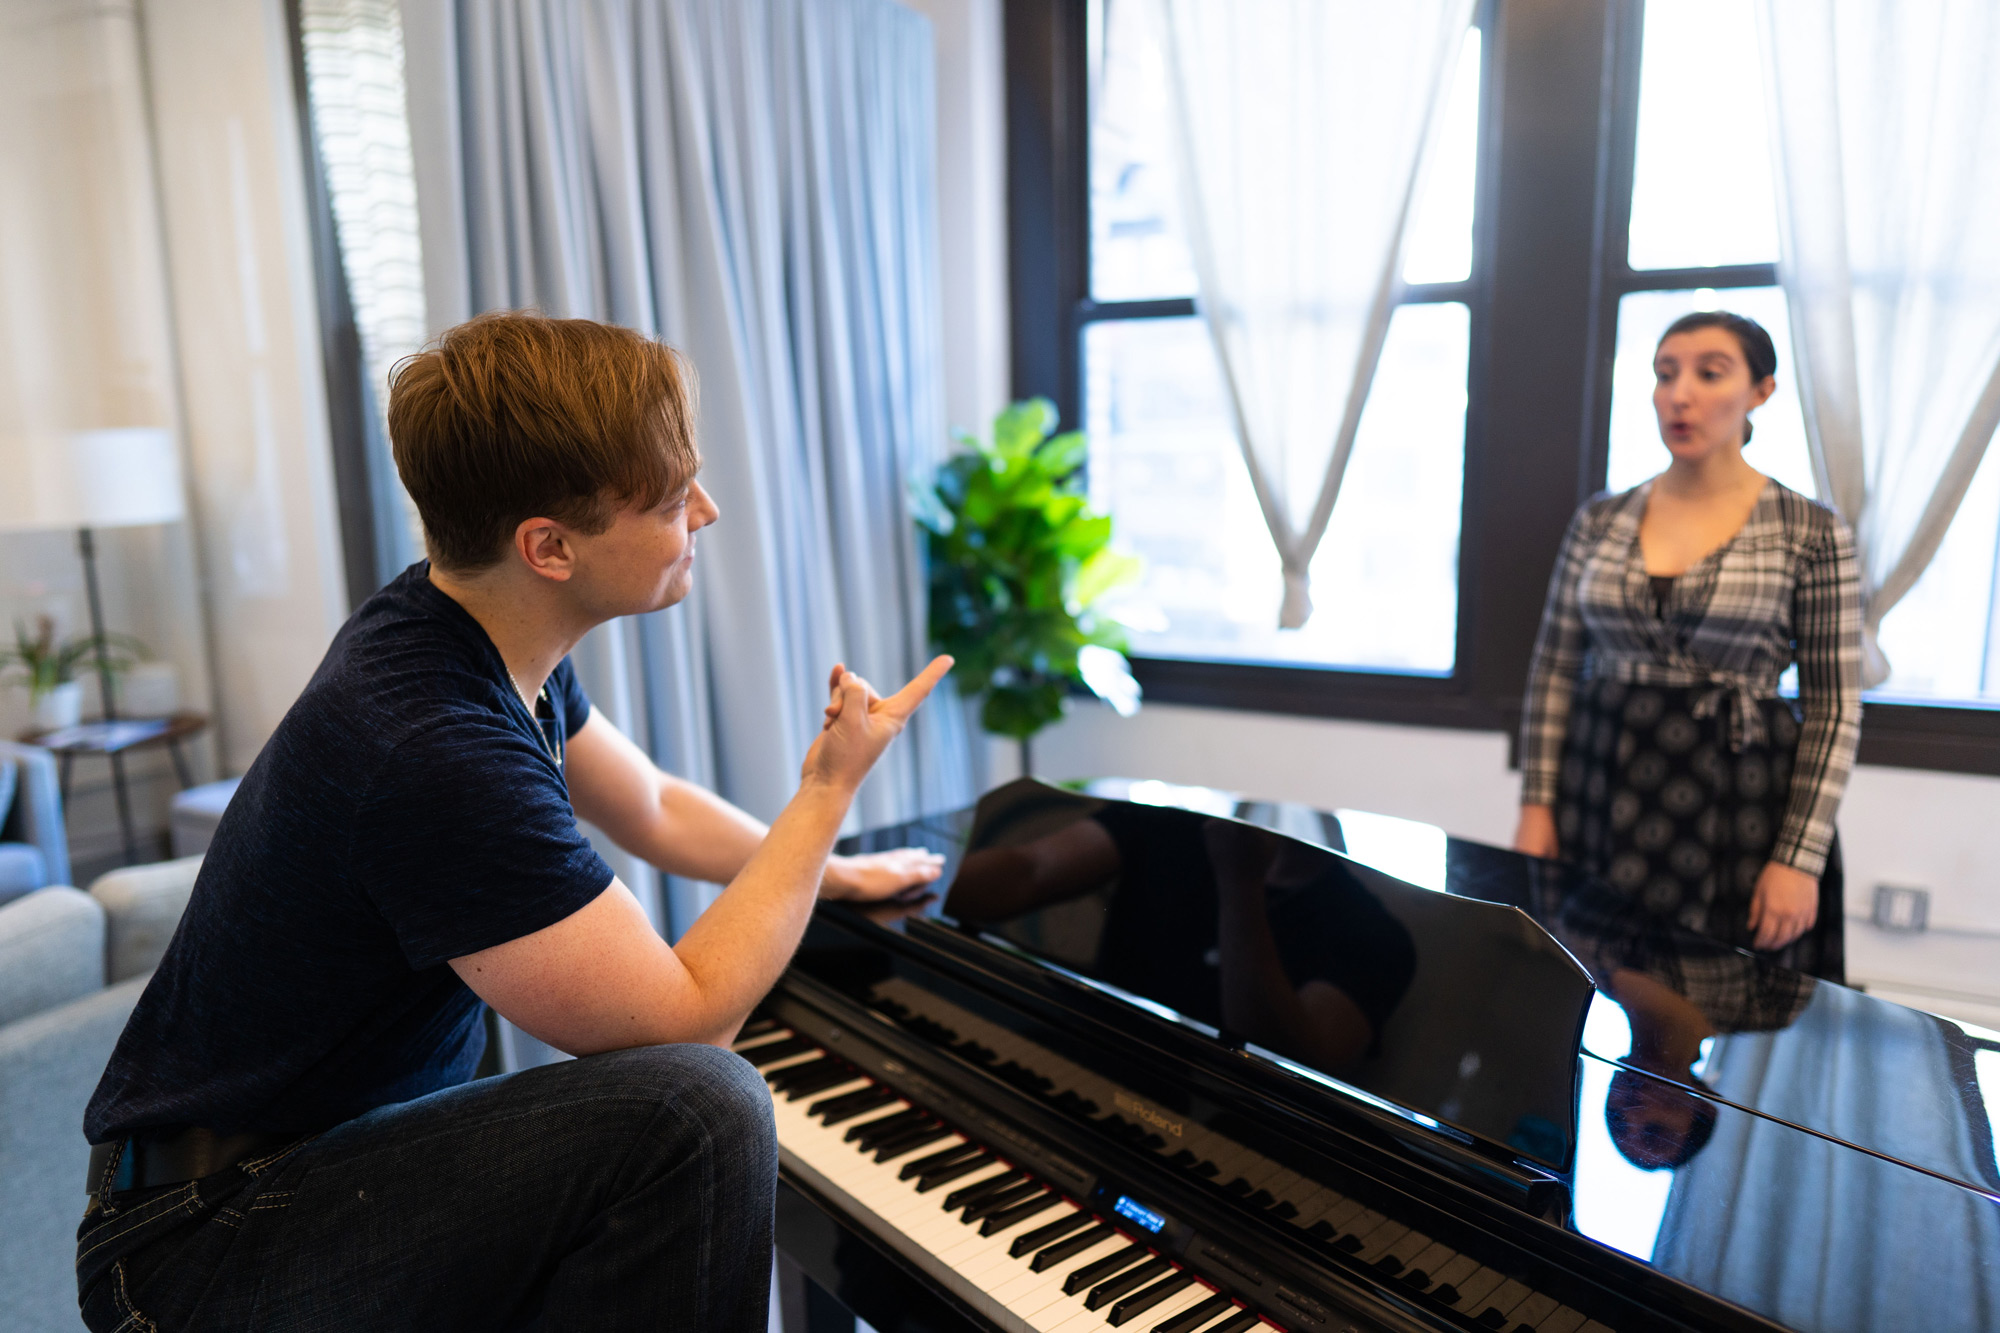 Justin teaching behind piano pointing finger